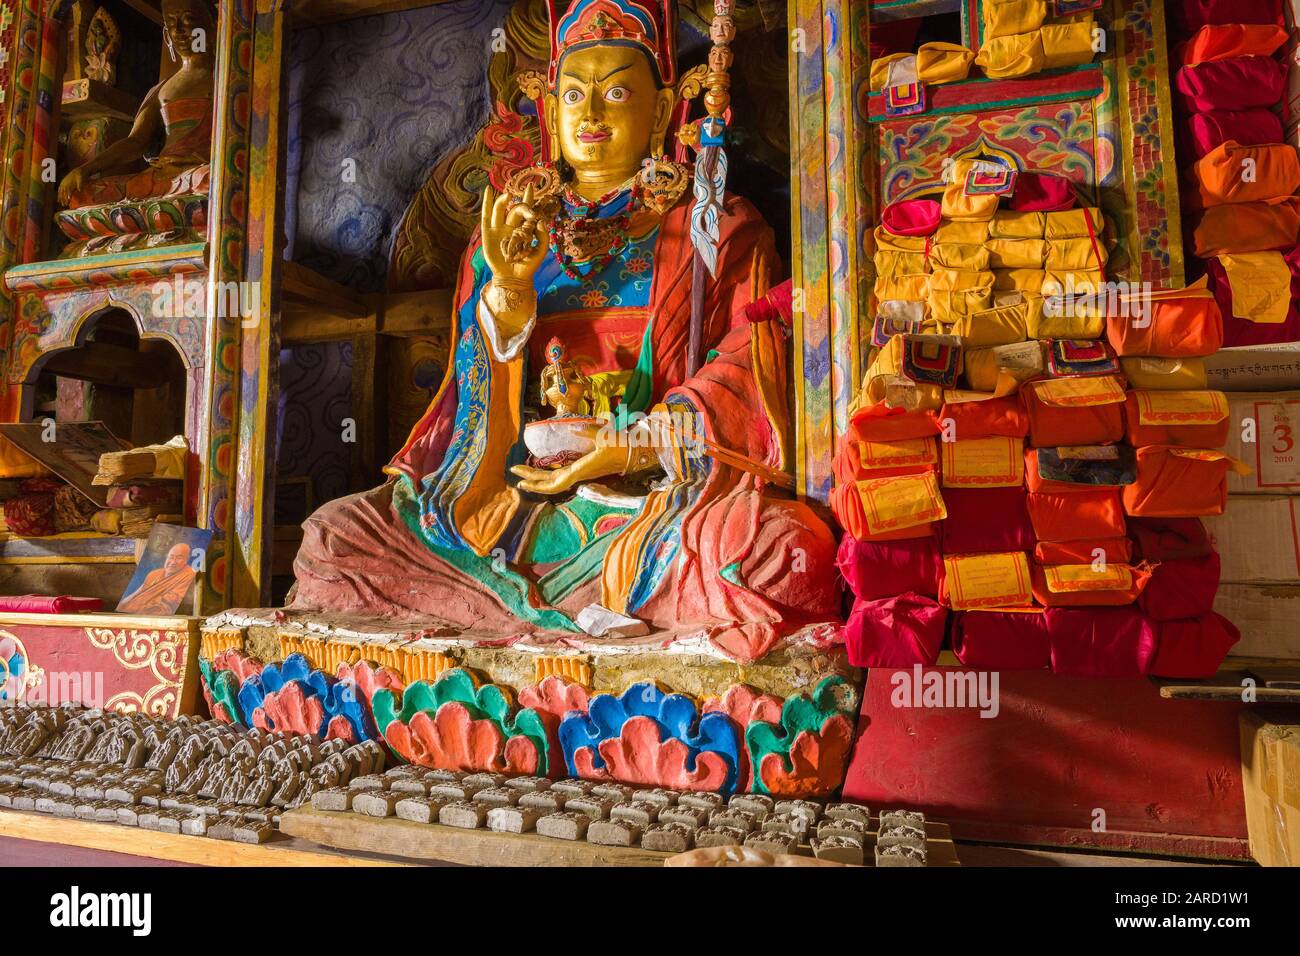 Buddhist texts and statue in a Tibetan Monastery / Gompa, Dolpo,Nepal Stock Photo